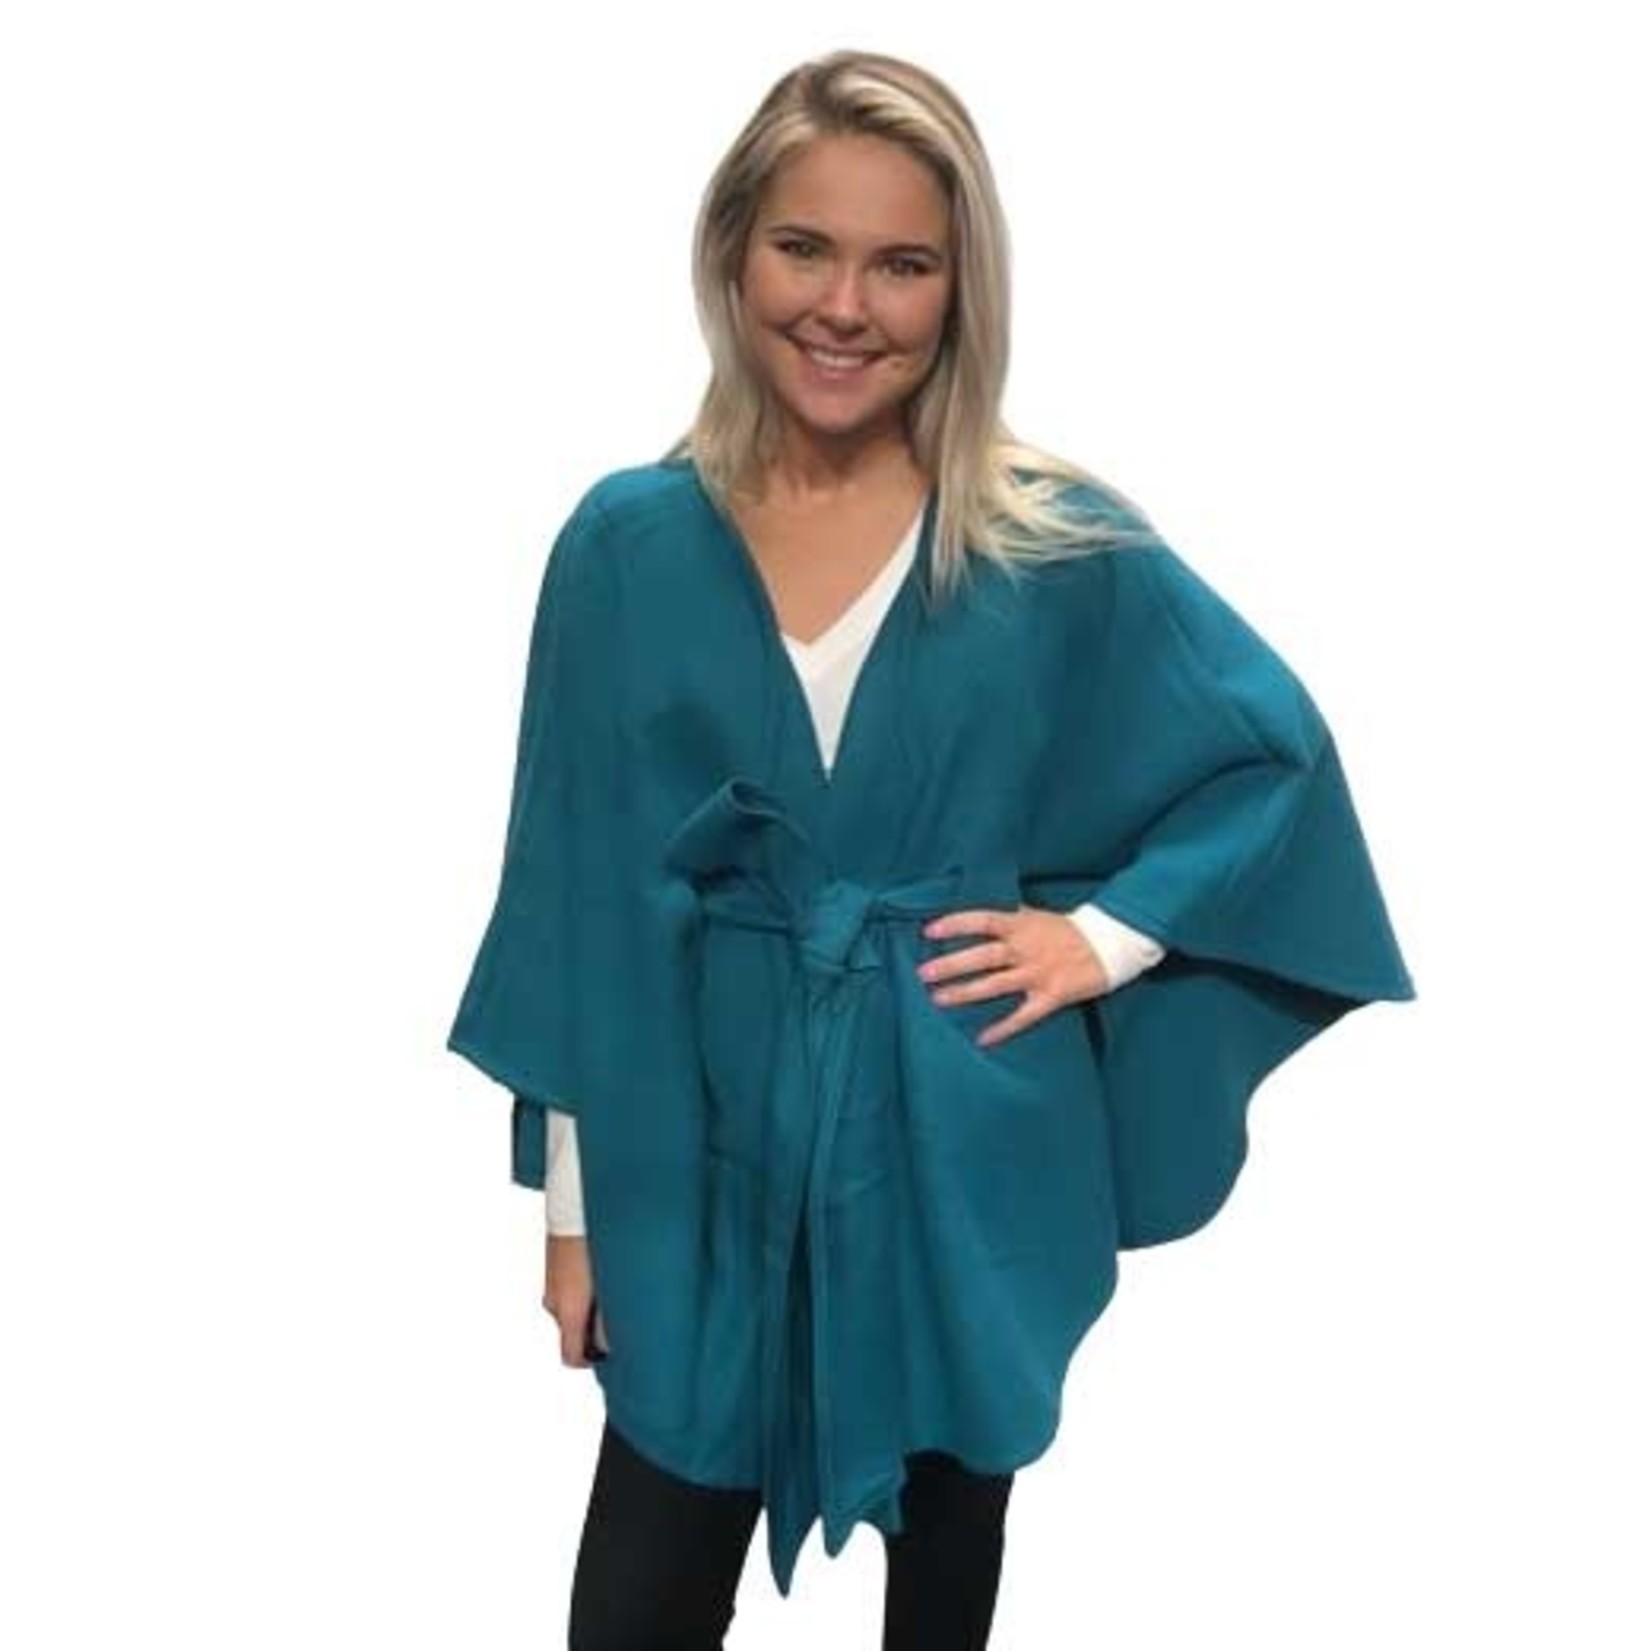 Magic Scarf Luxury Wool Feel Belted Cape in Teal